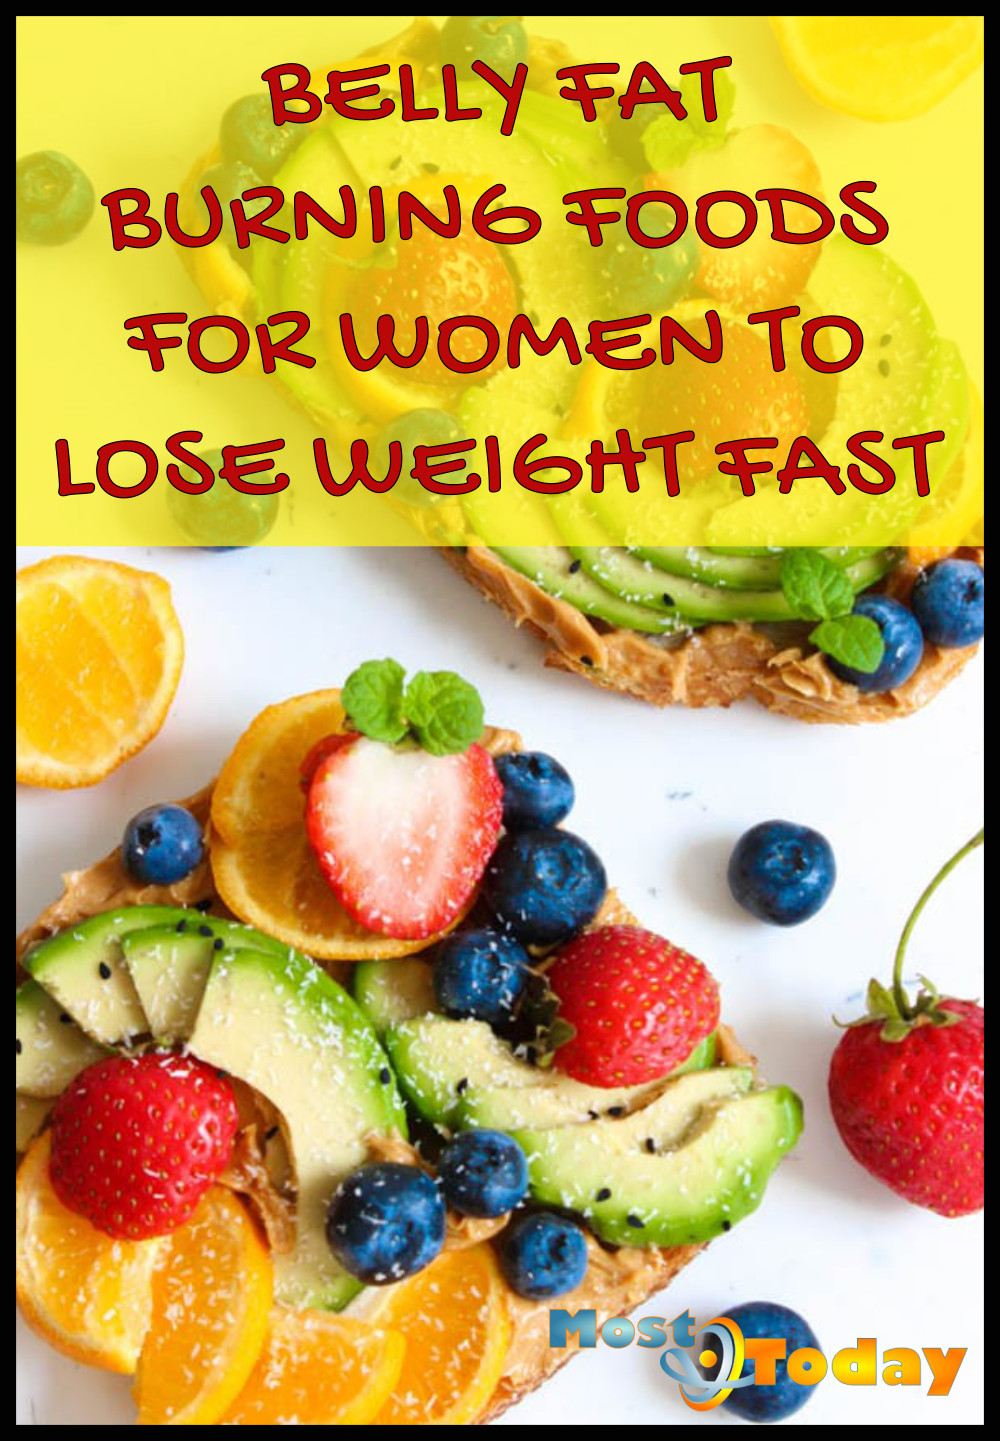 Fat Burning Foods Losing Weight Meals
 BELLY FAT BURNING FOODS FOR WOMEN TO LOSE WEIGHT FAST